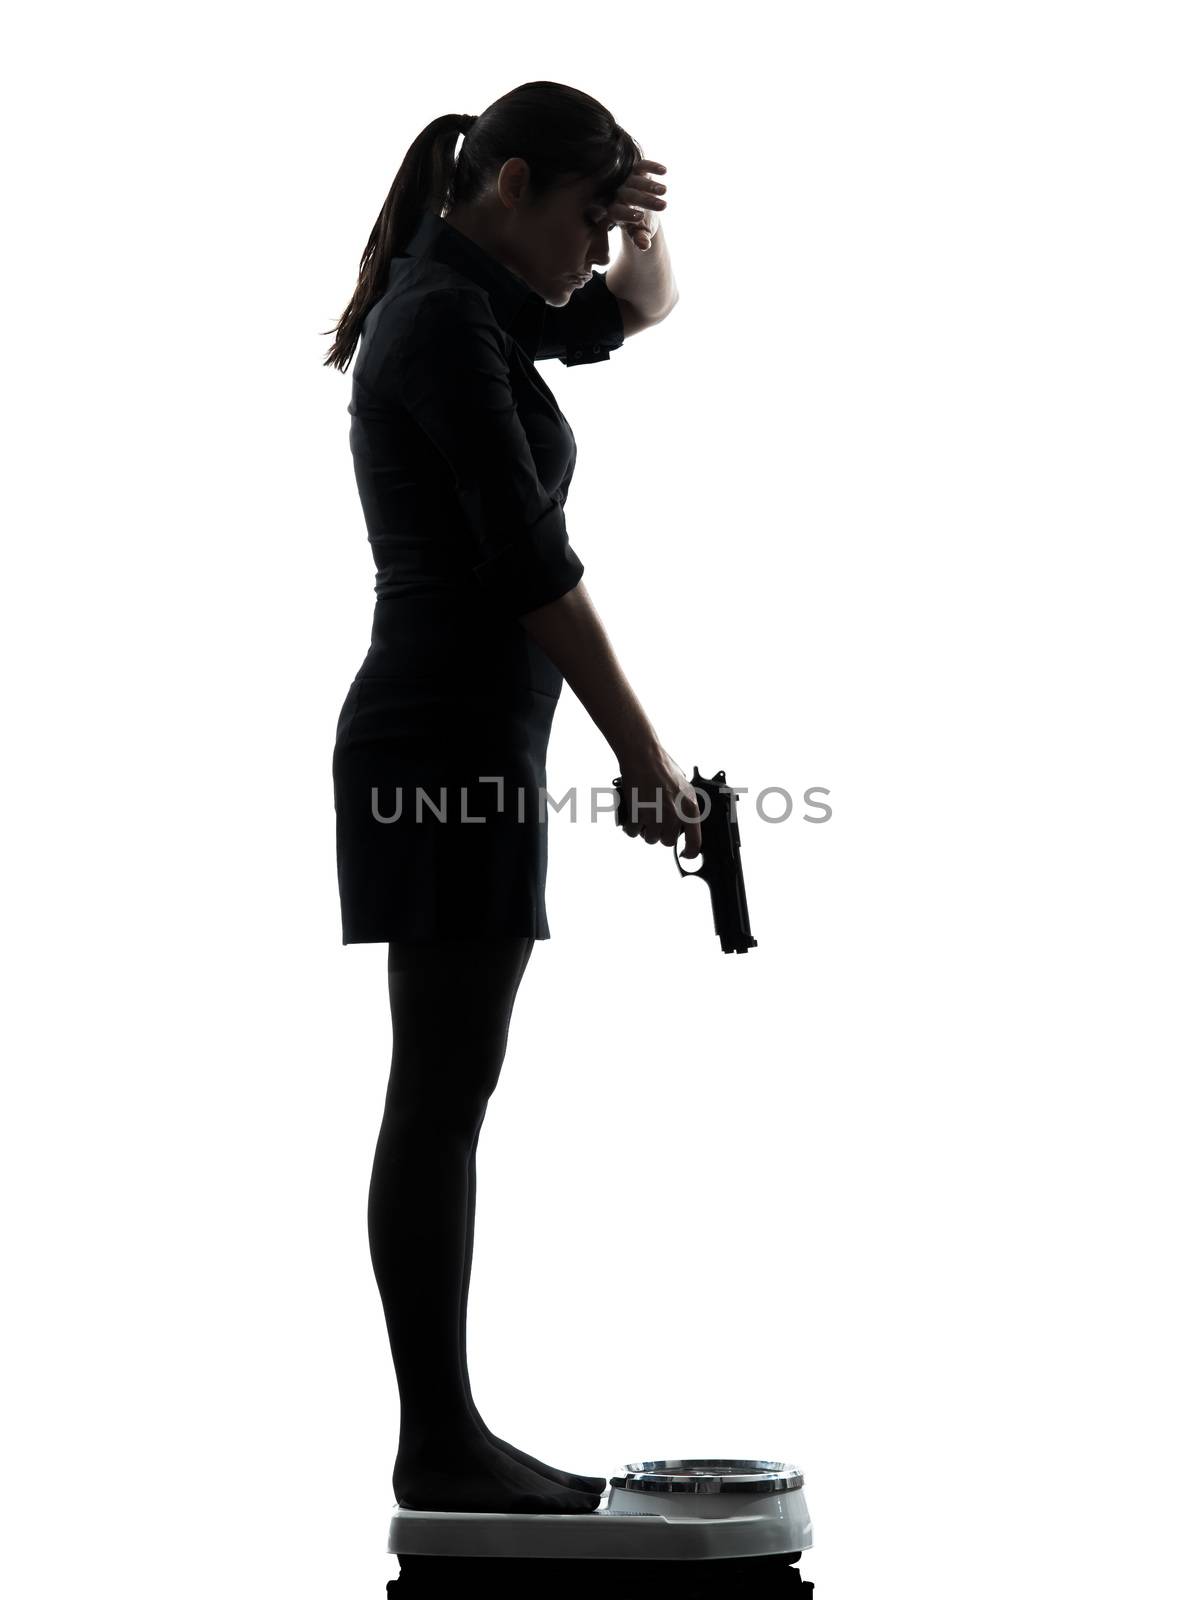 one woman standing on weight scale despair aiming gun silhouette studio isolated on white background